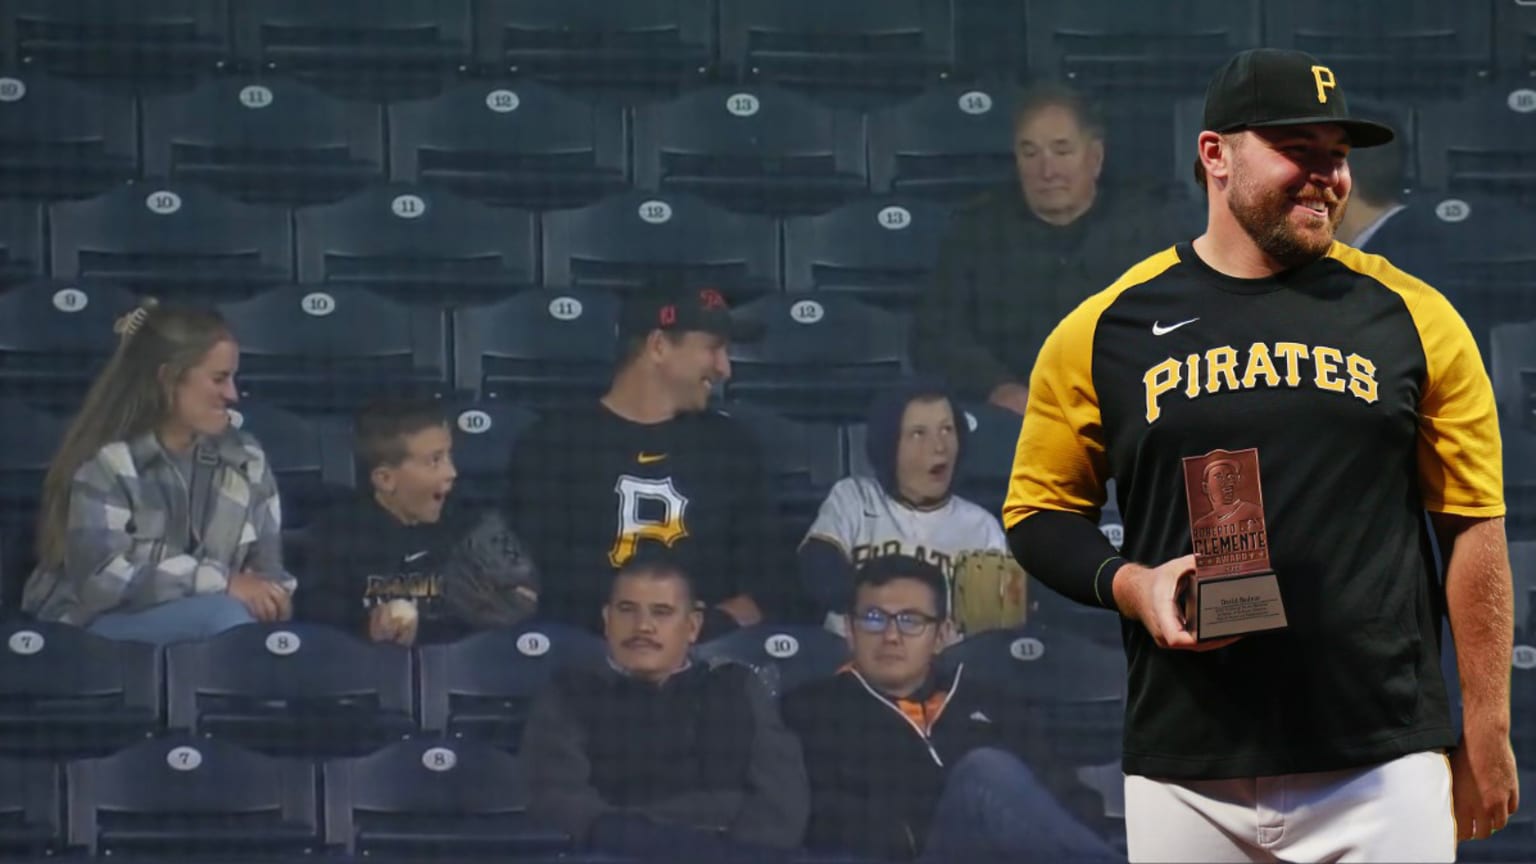 A composite image showing a smiling David Bednar over a screengrab of a family in the stands, the two young boys with looks of awe on their faces